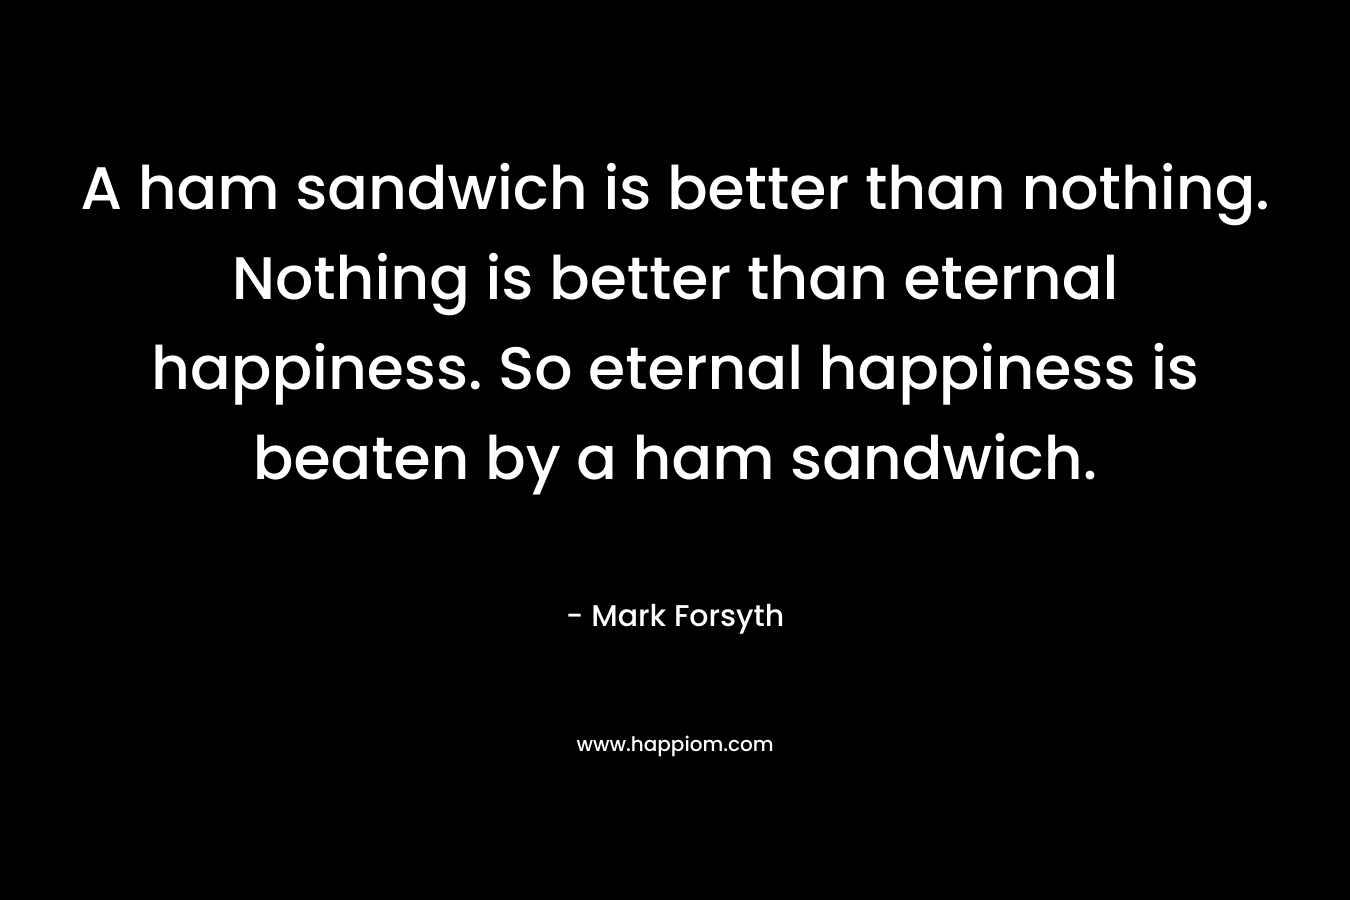 A ham sandwich is better than nothing. Nothing is better than eternal happiness. So eternal happiness is beaten by a ham sandwich.